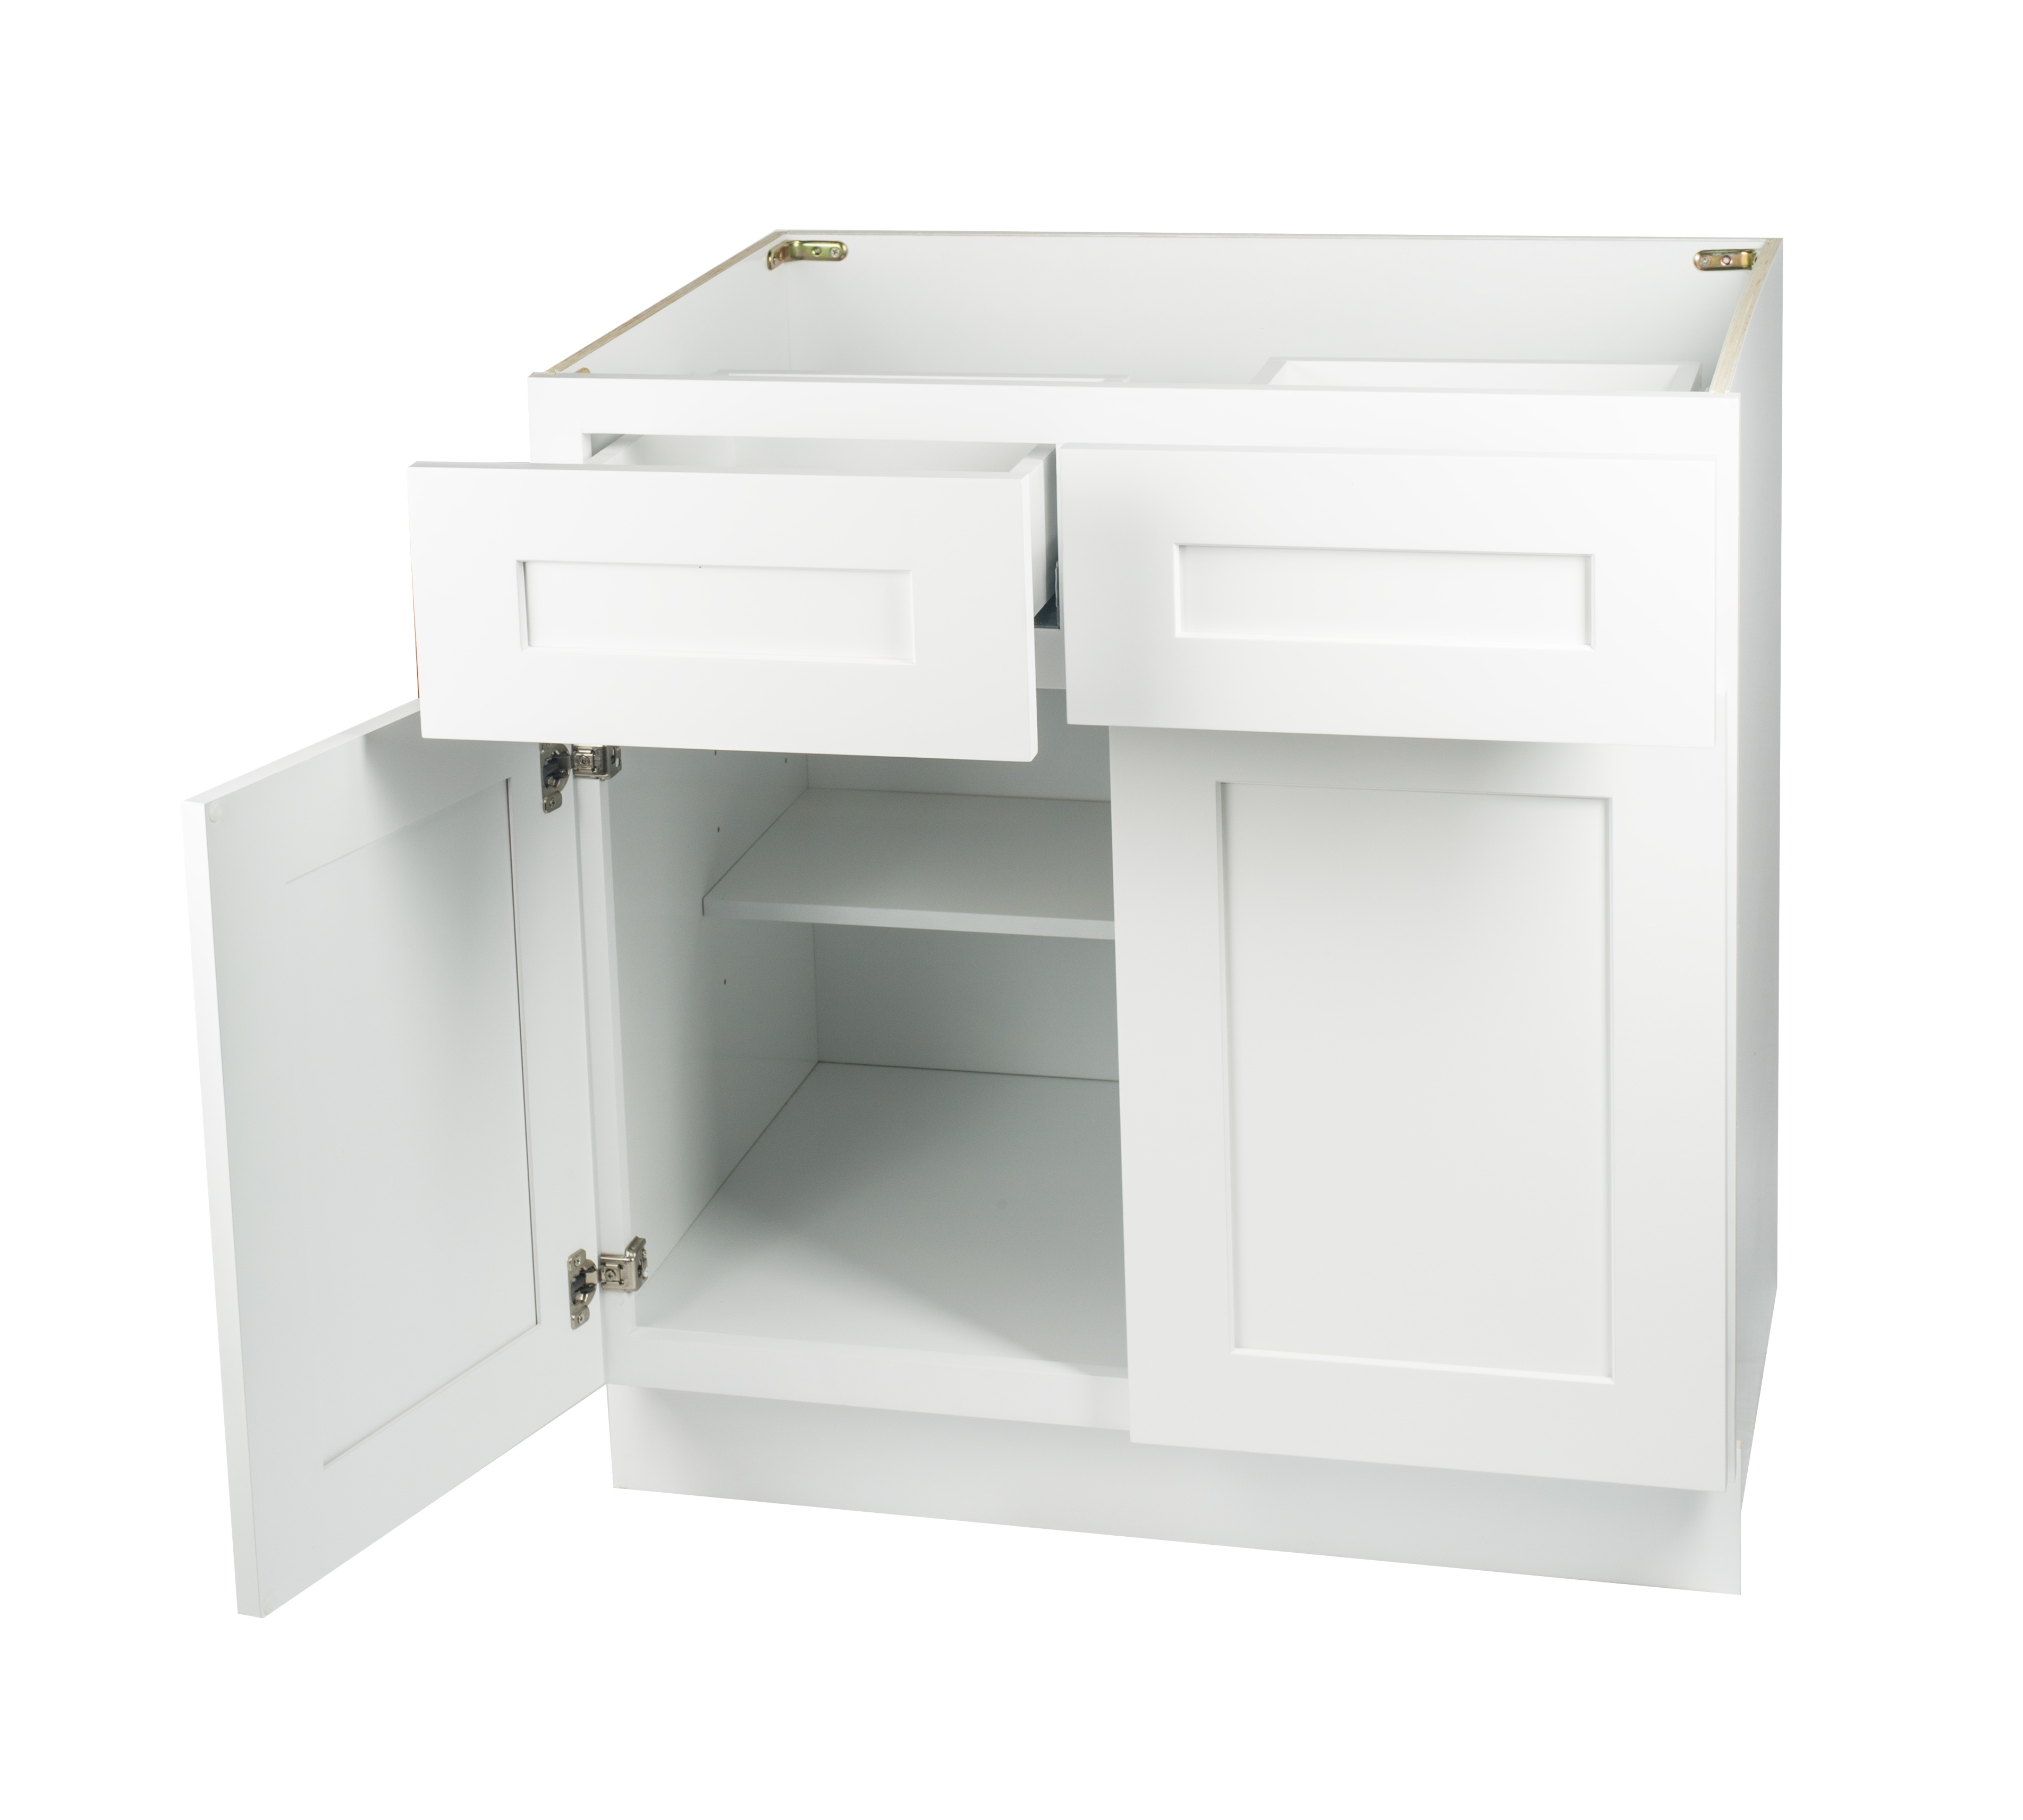 Ready to Assemble 42Wx34.5Hx24D in. Shaker Base Cabinet with 2 Door and 2 Drawer in White